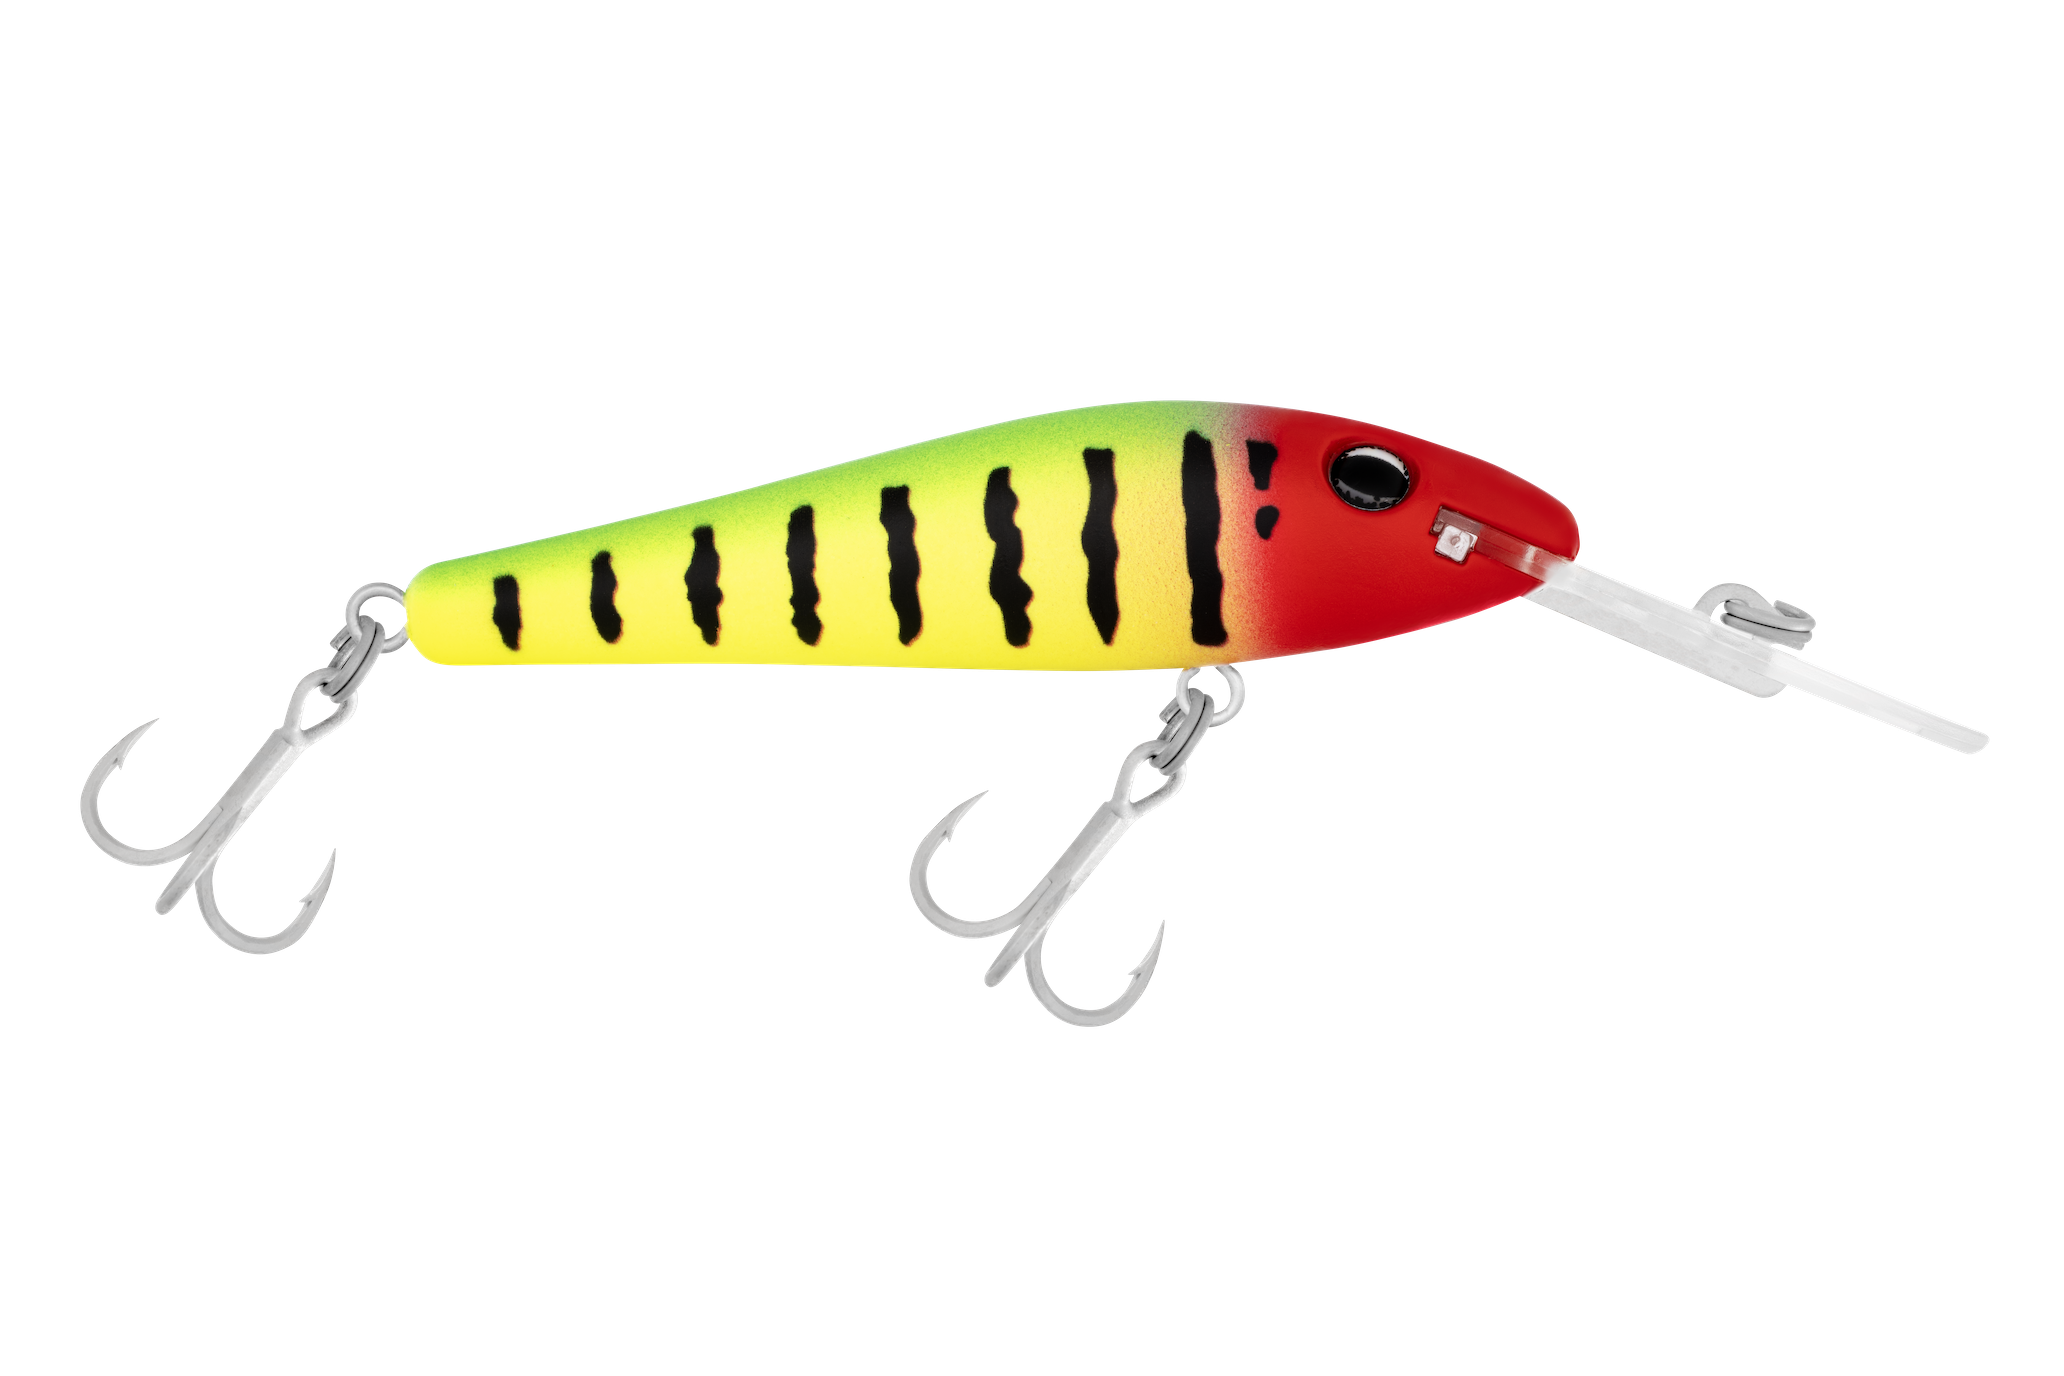 Lot of 5 Discontinued Norman Thin N Crankbaits – FISHING LURES GOOD COLORS  USED – CA.DI.ME.